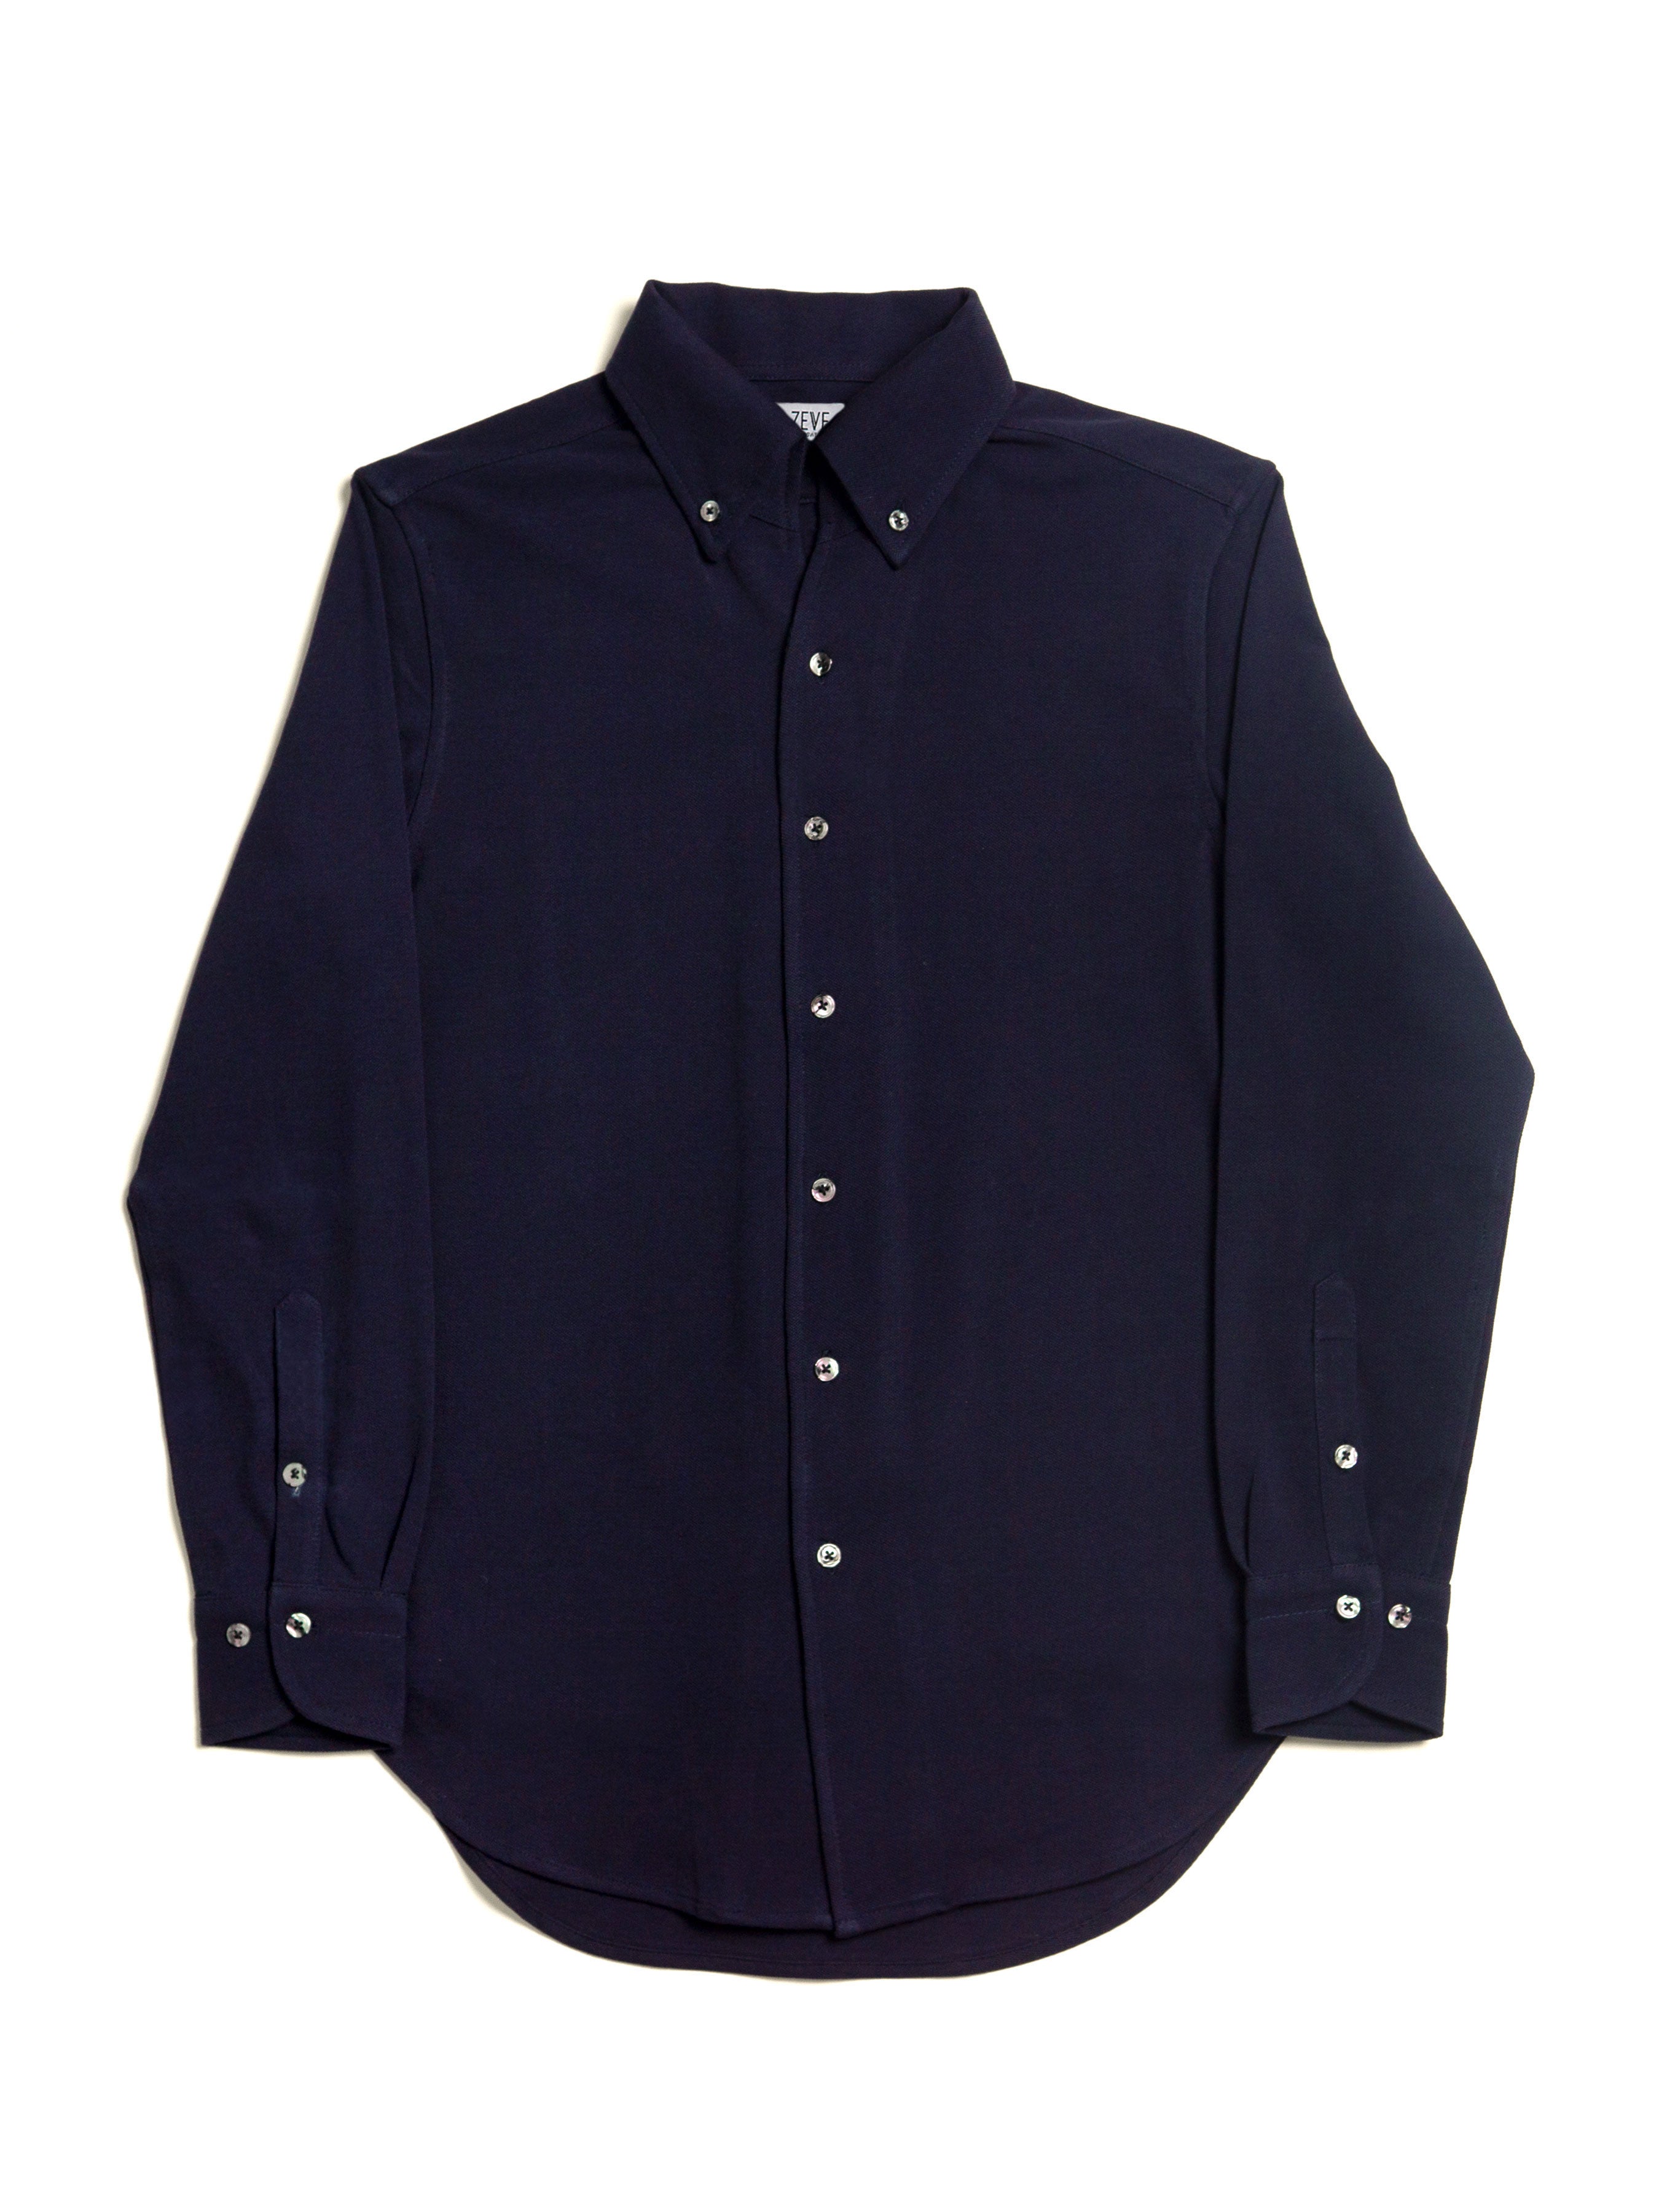 Long Sleeve Polo Shirt-  Navy Blue Button Down - Zeve Shoes